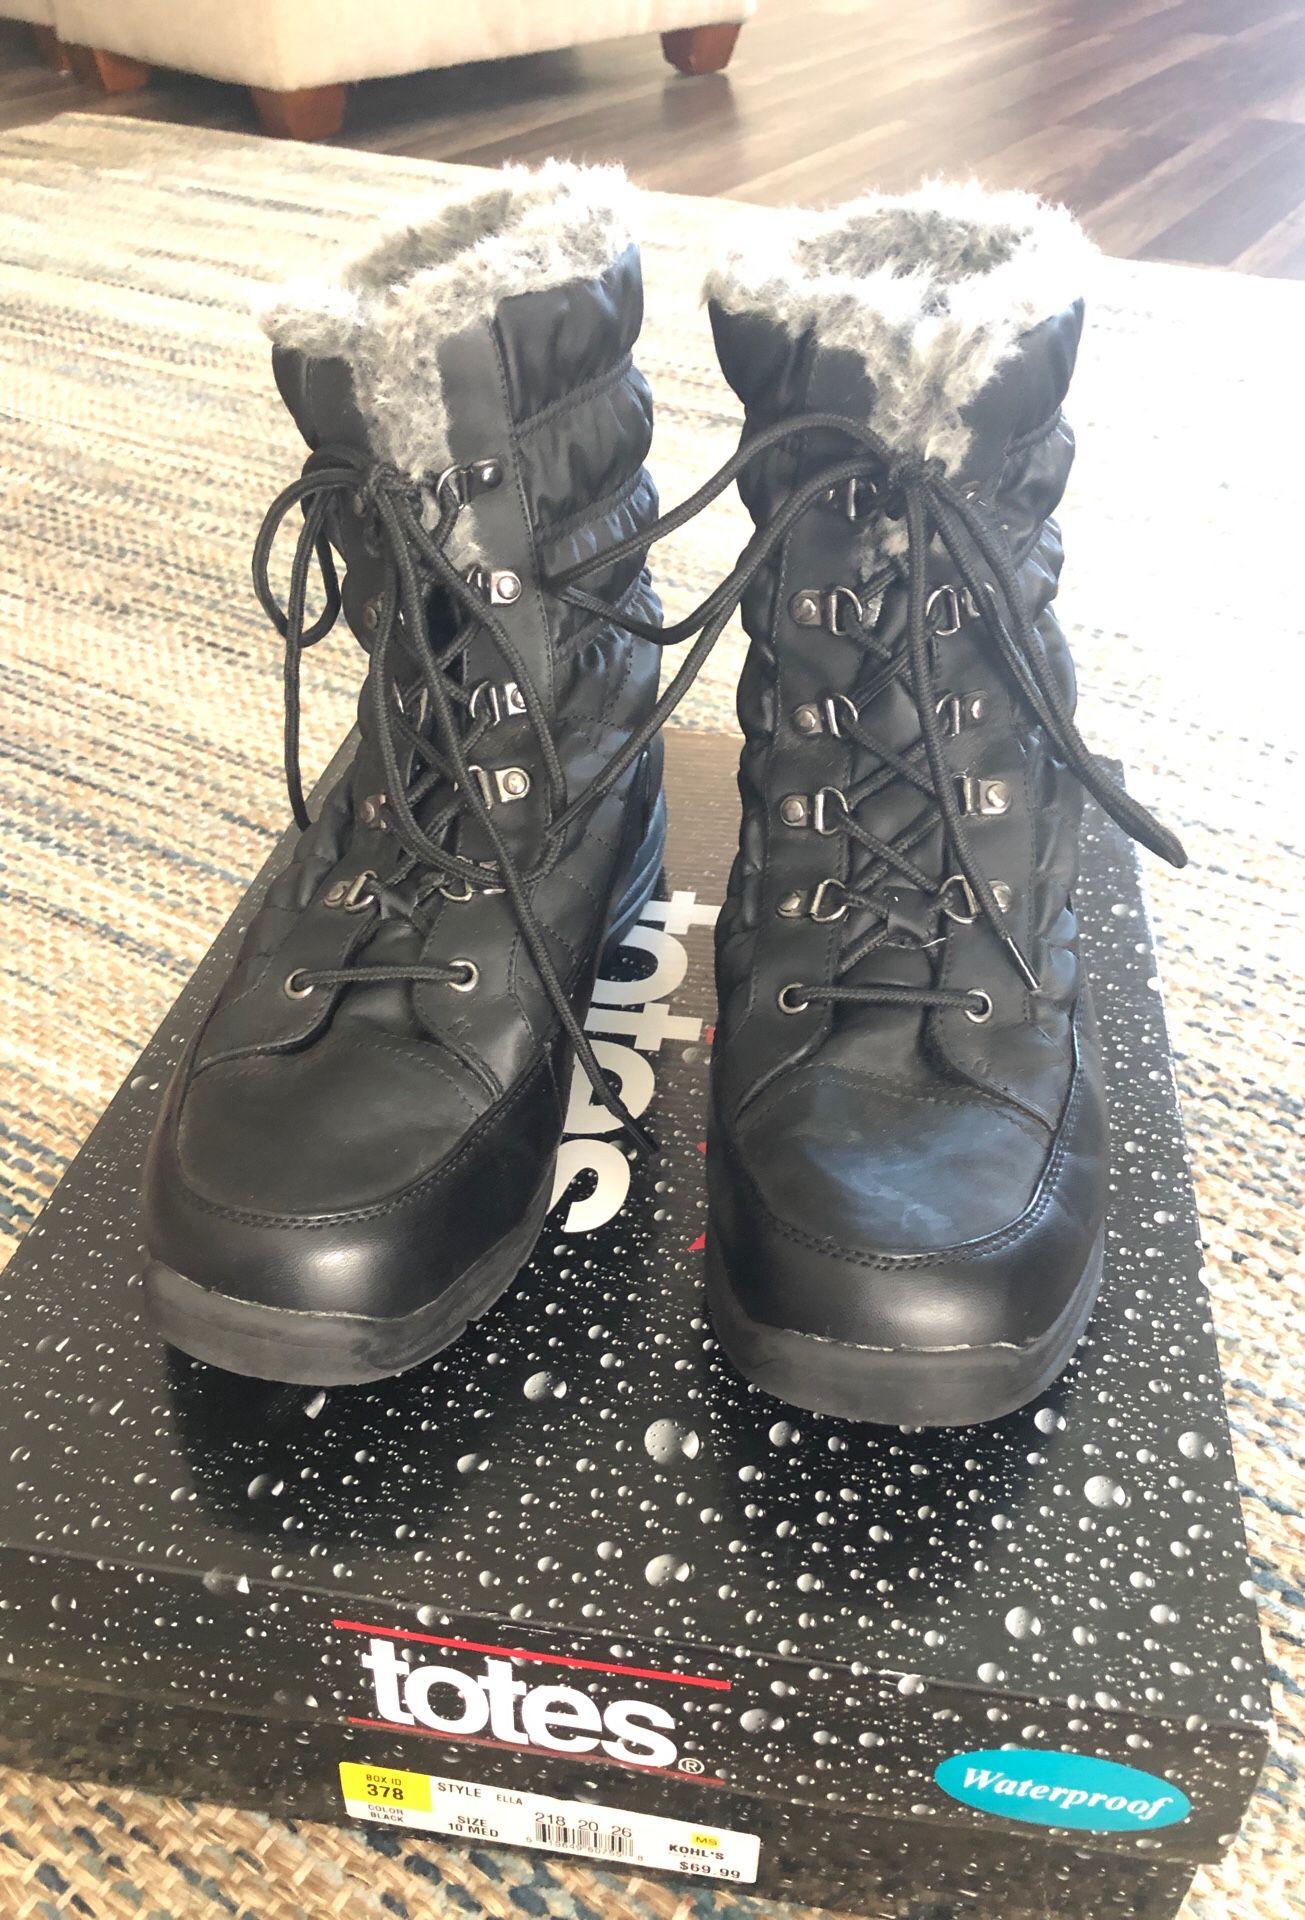 Totes Waterproof snow boots sz 10